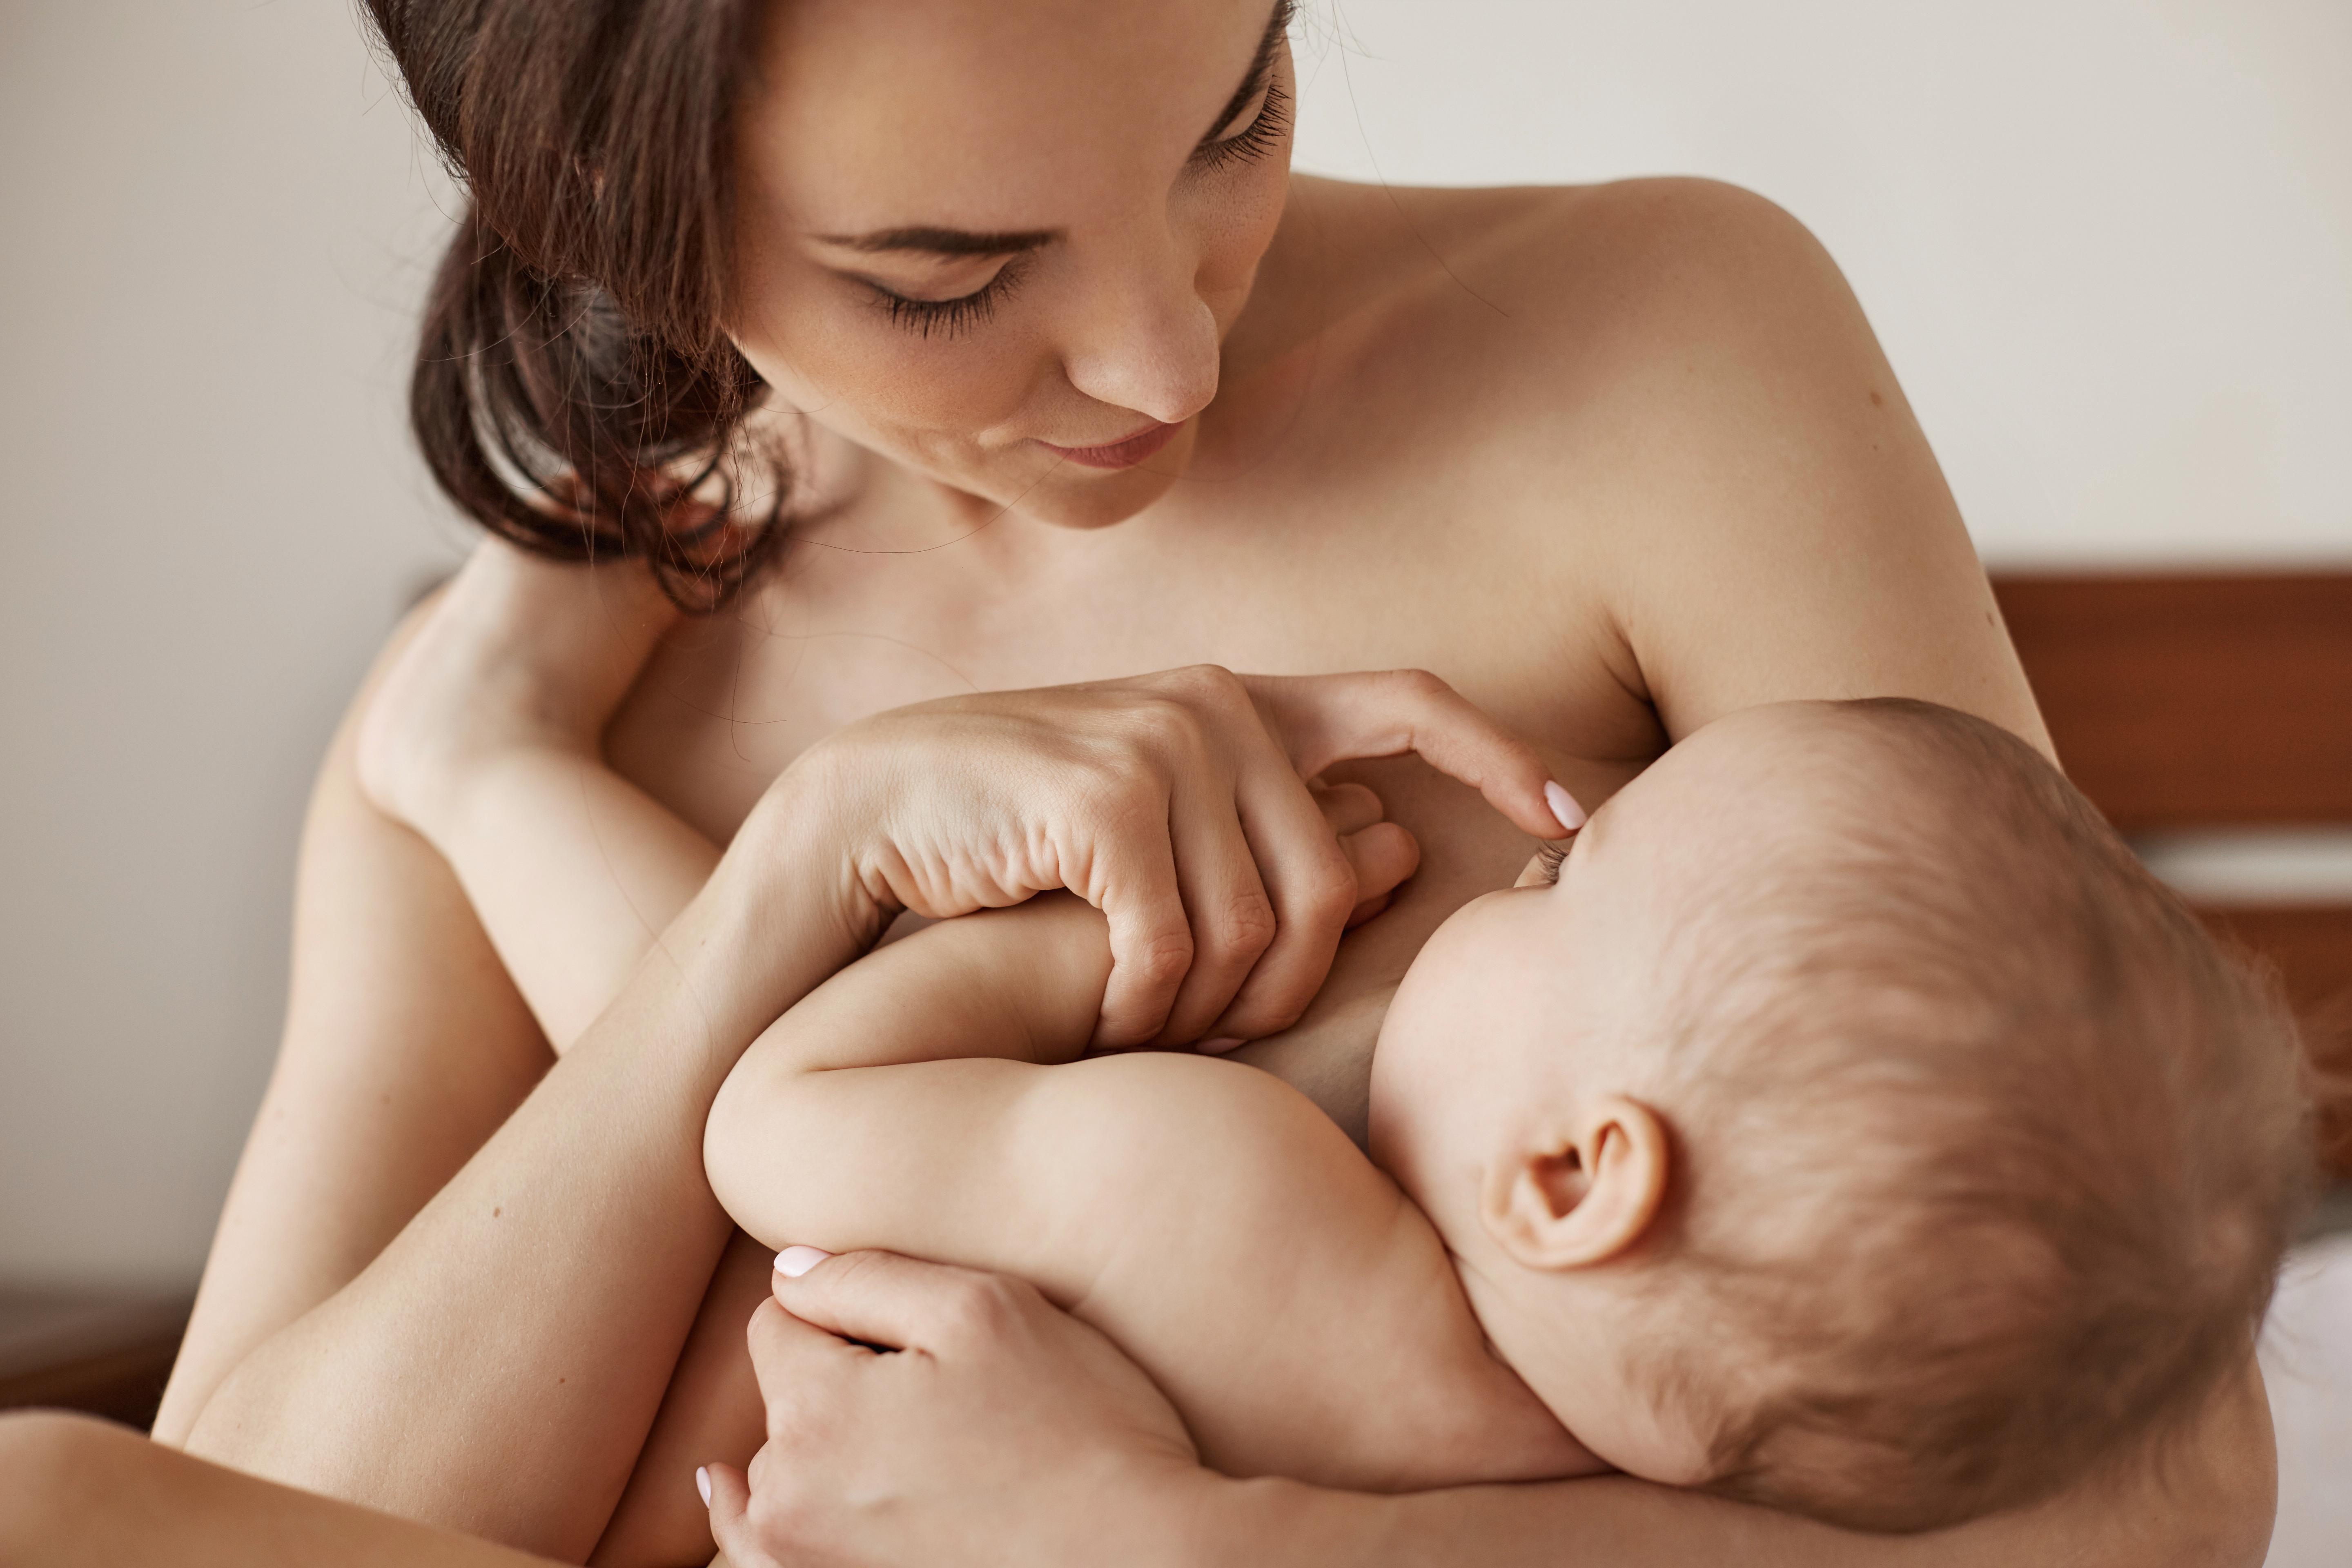 Young tender nude mother breastfeeding hugging her newborn baby sitting in bed at morning.